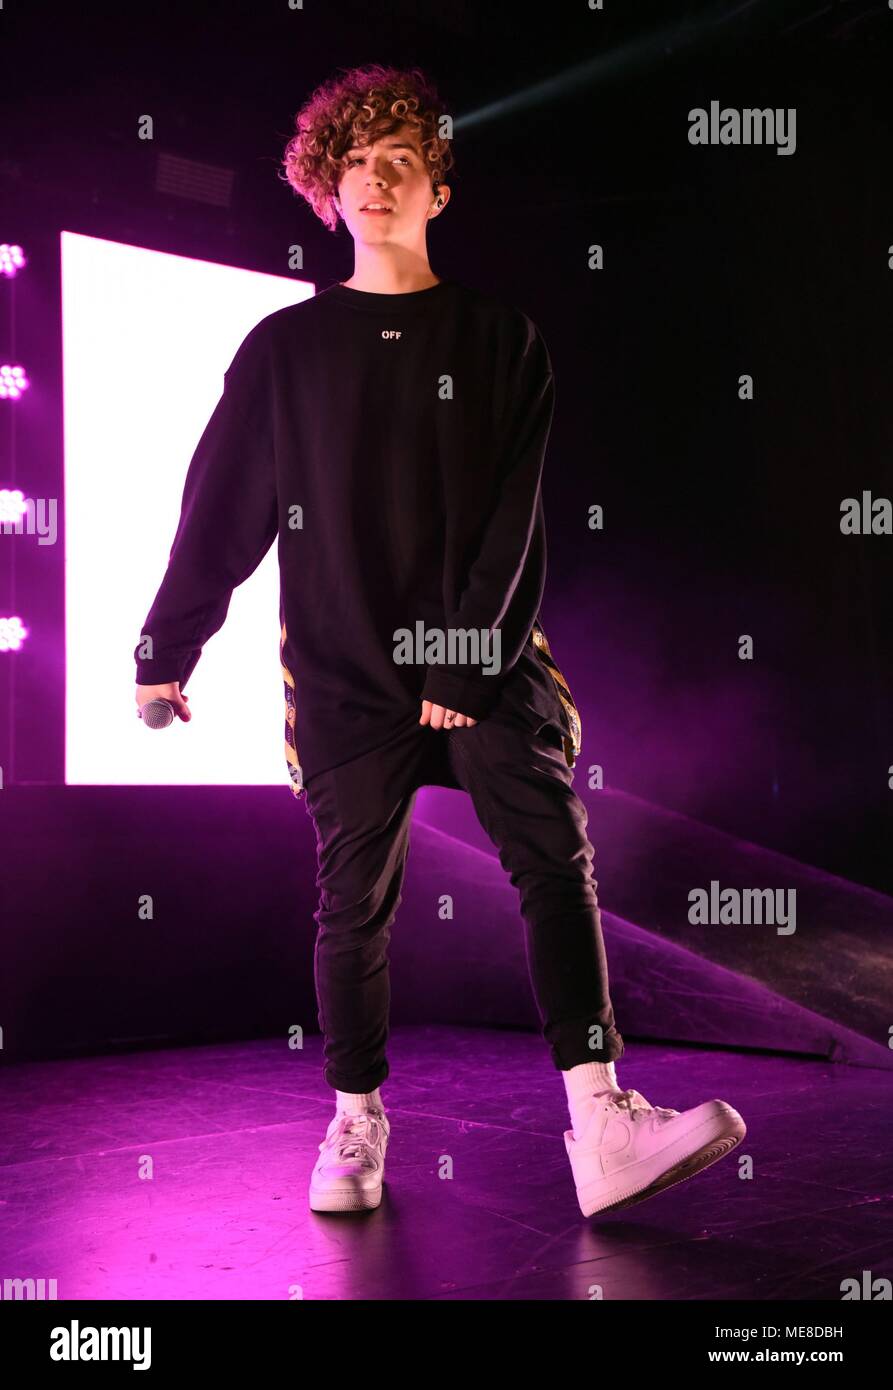 Jack avery hi-res stock photography and images - Alamy